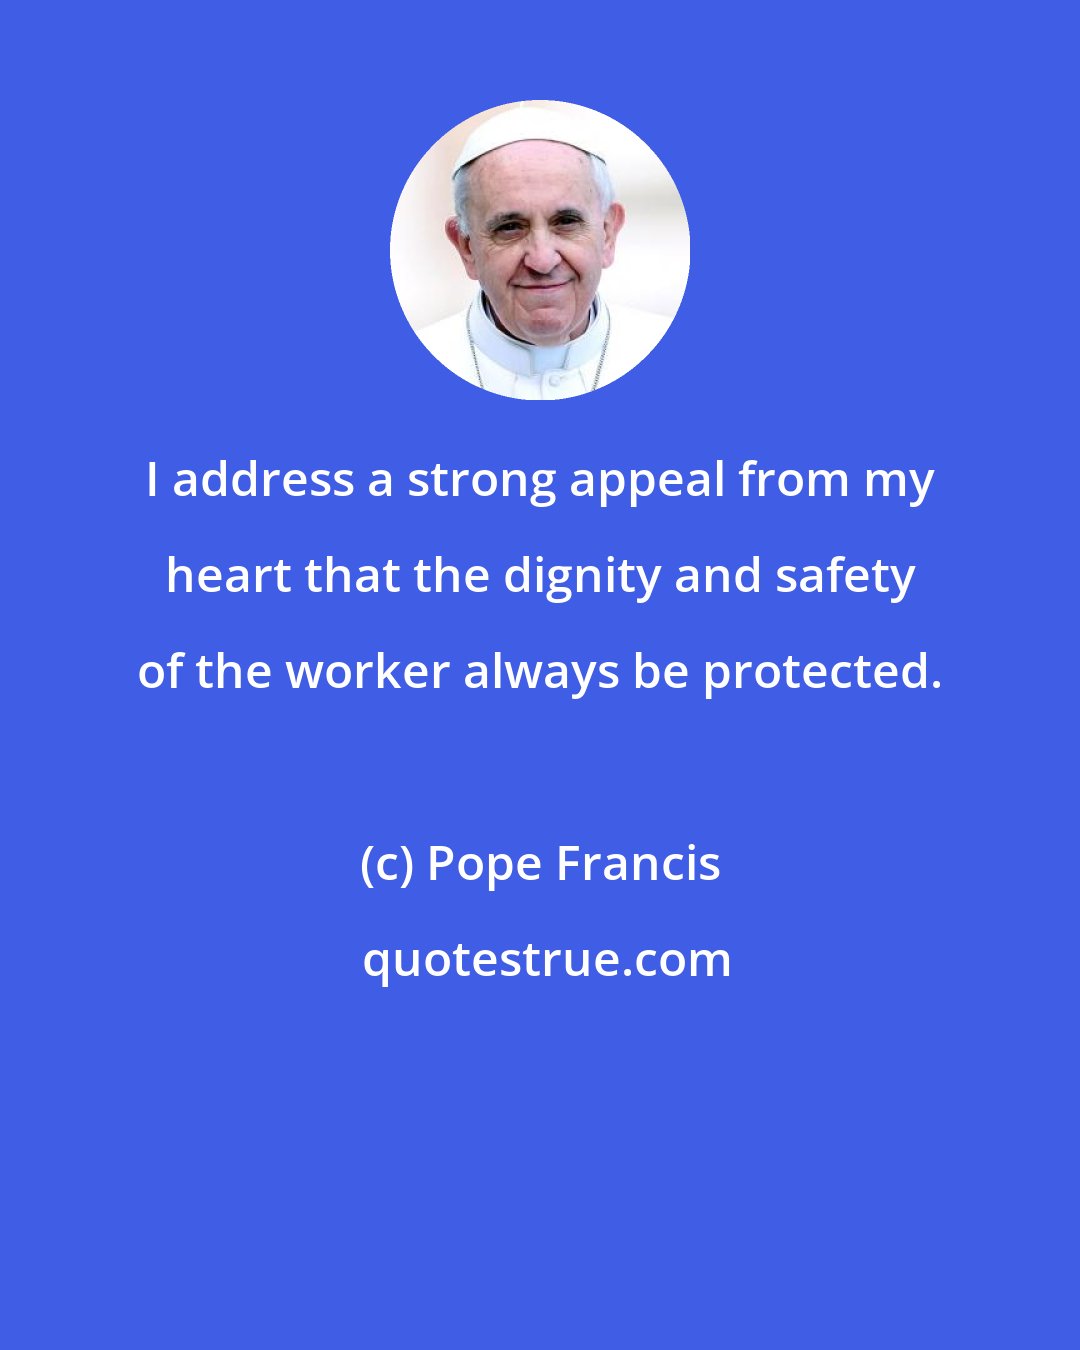 Pope Francis: I address a strong appeal from my heart that the dignity and safety of the worker always be protected.